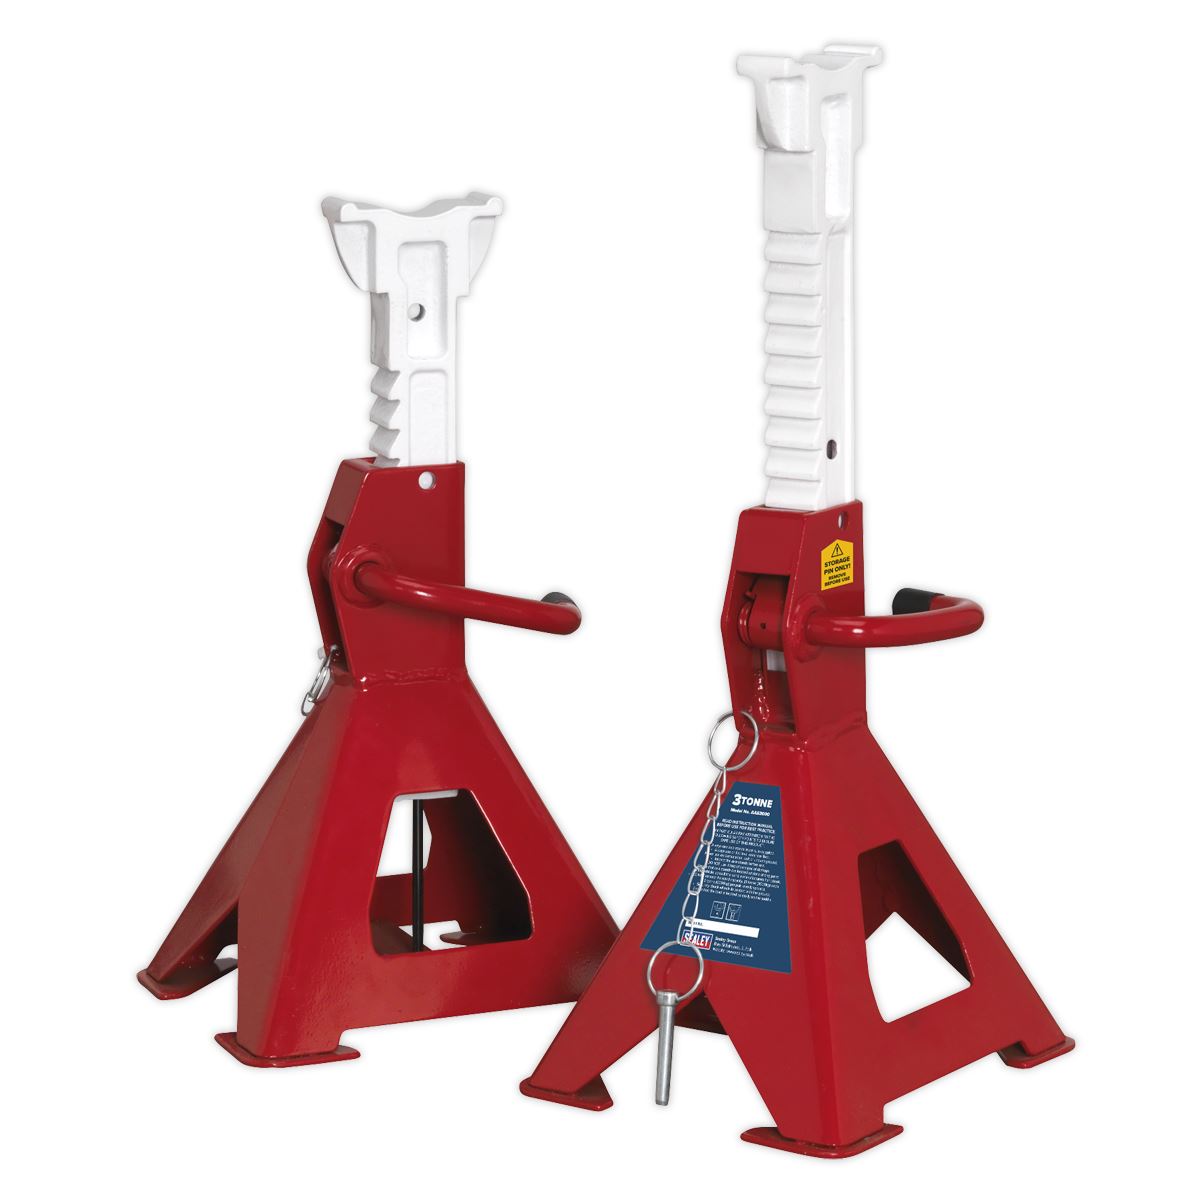 Sealey Auto Rise Ratchet Axle Stands (Pair) 3 Tonne Capacity per Stand